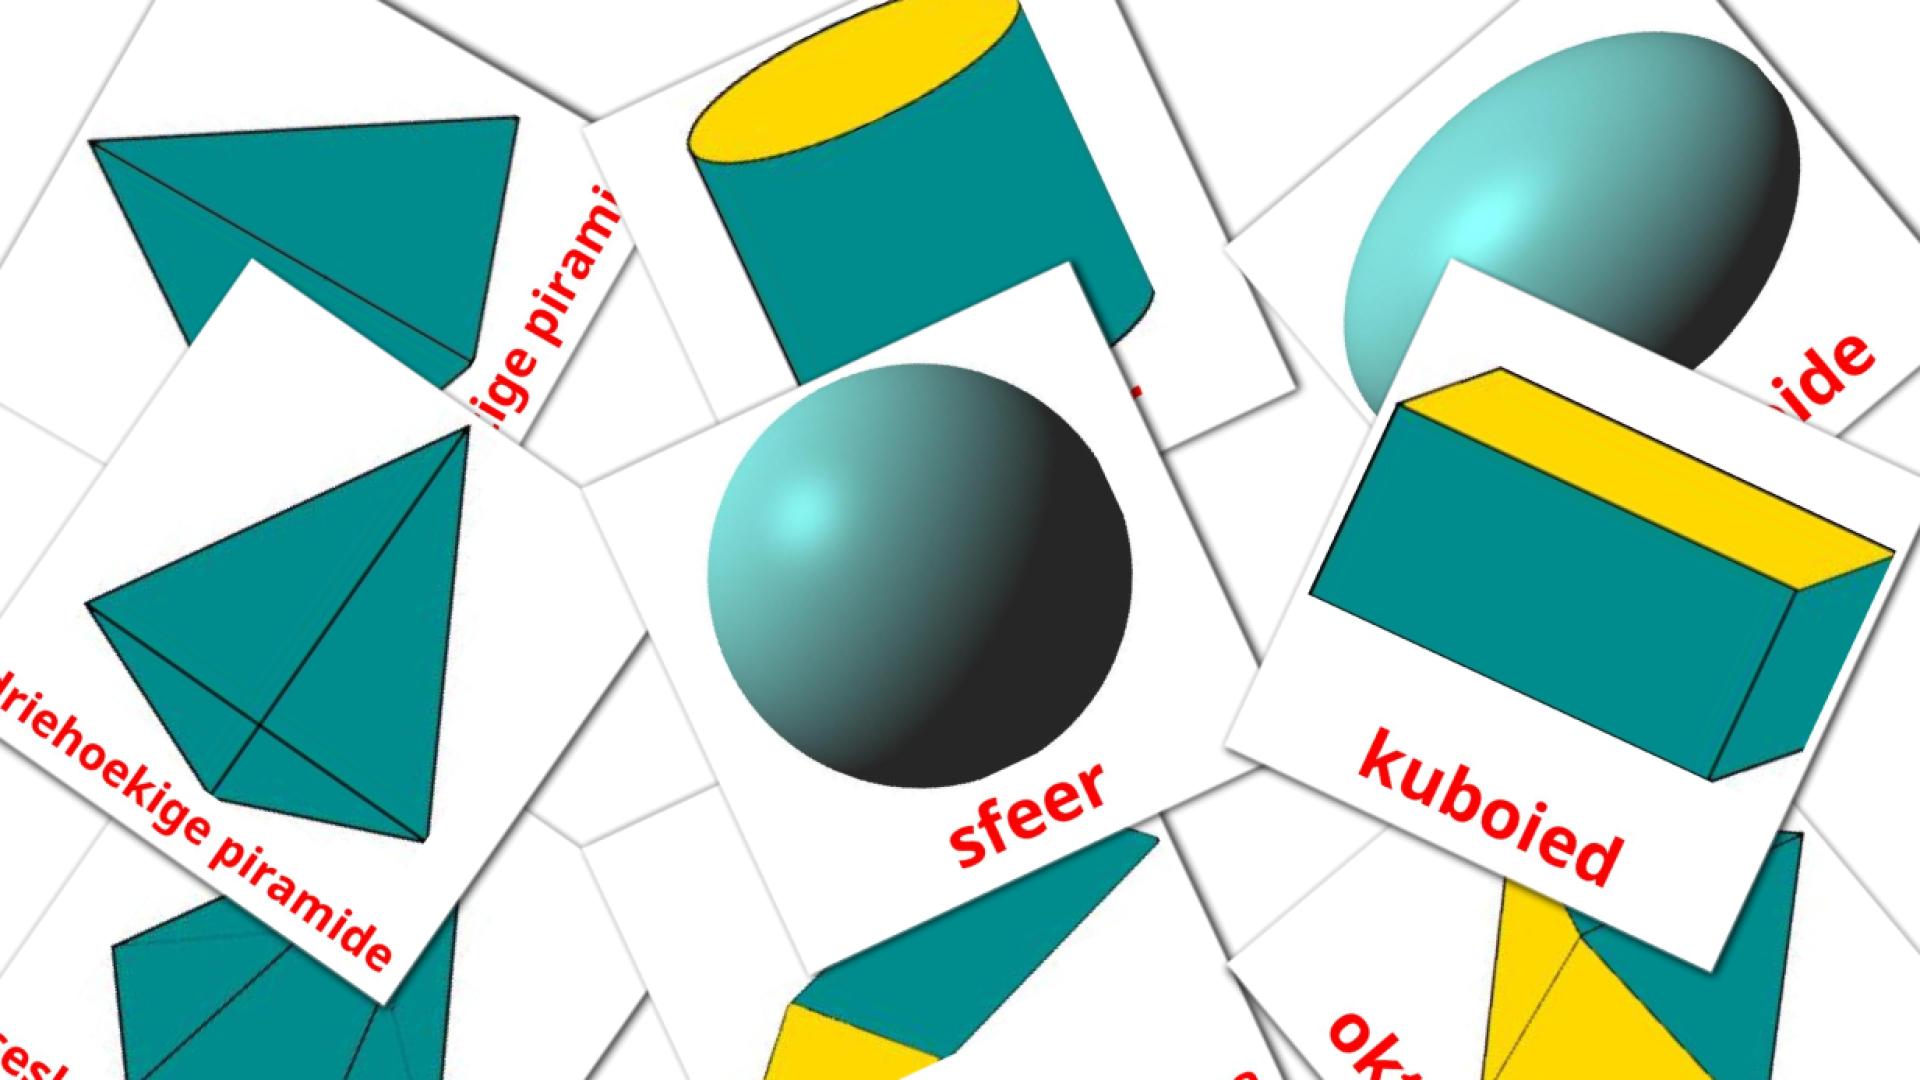 3D Shapes - afrikaans vocabulary cards